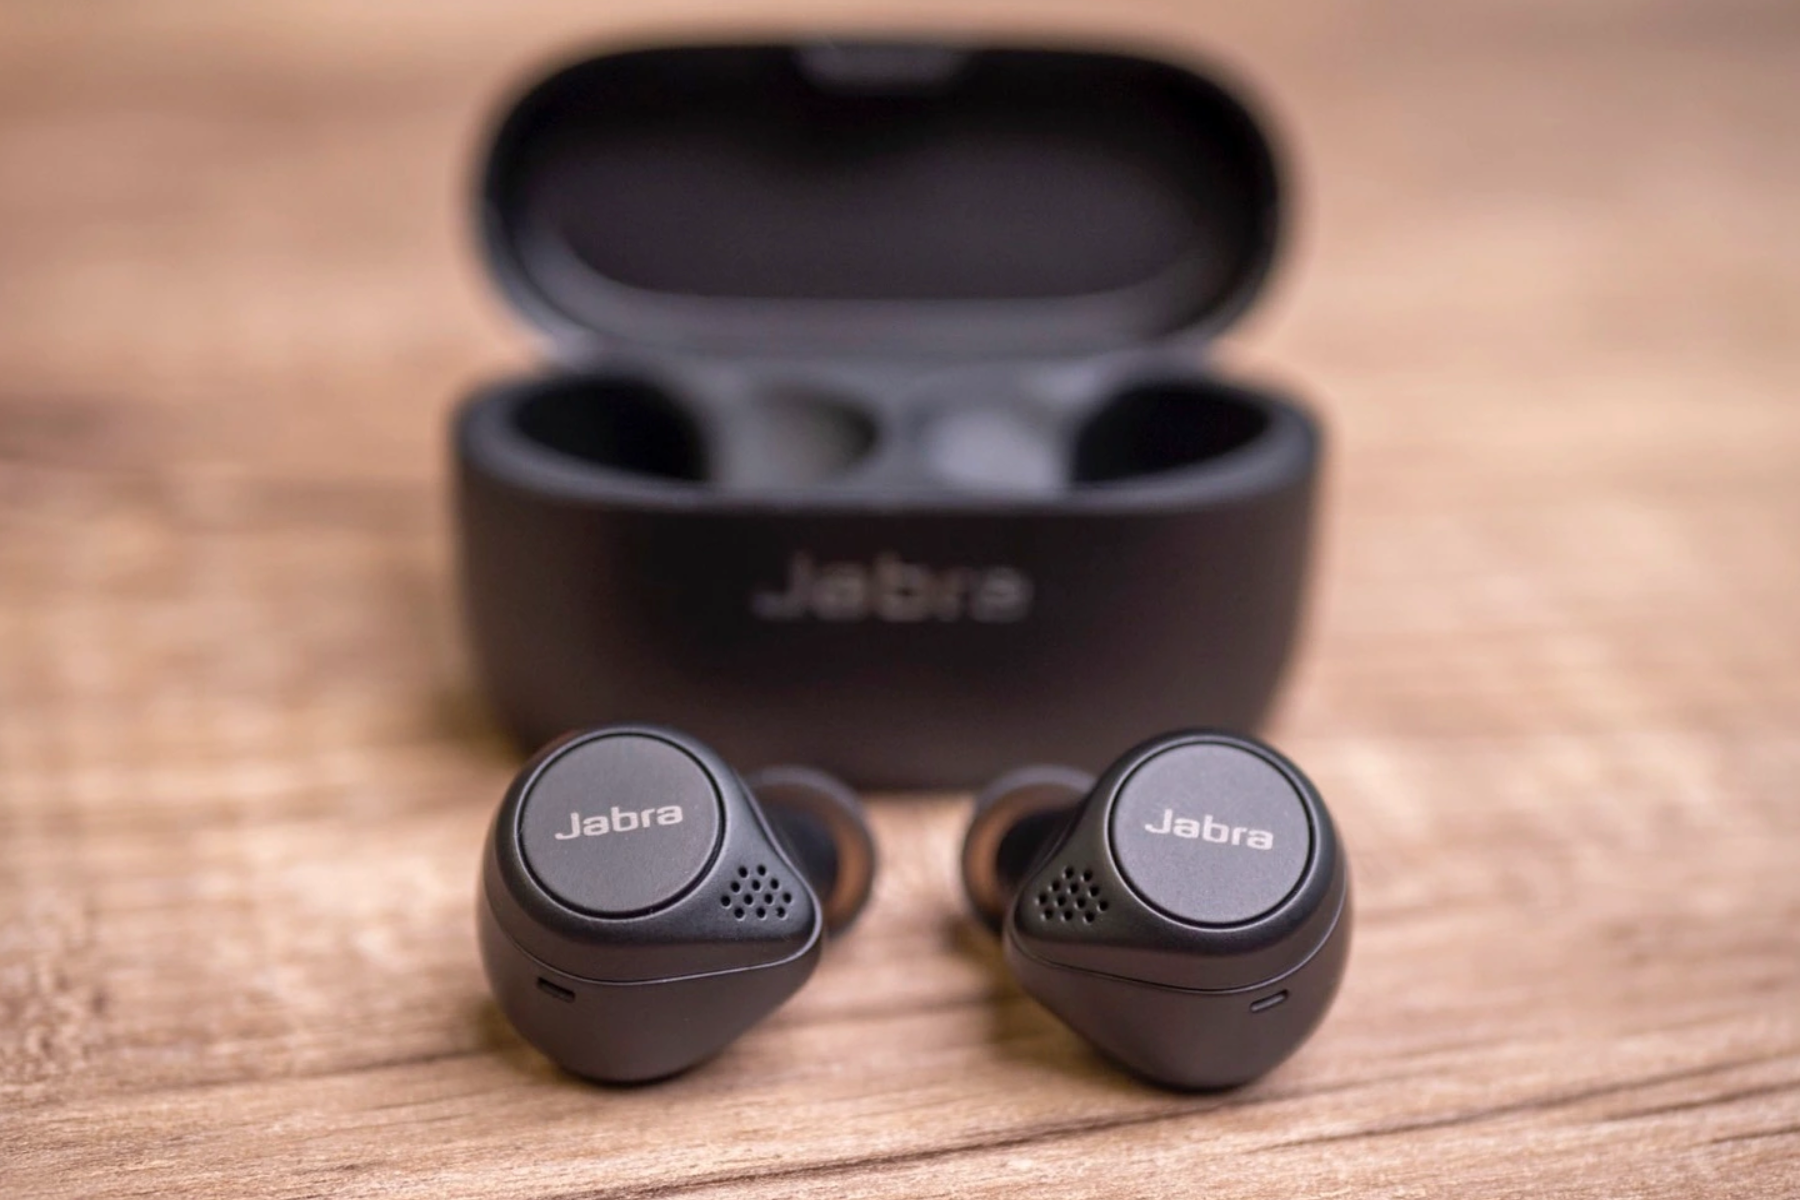 A Jabra Elite 75t Earbuds outside its charging station